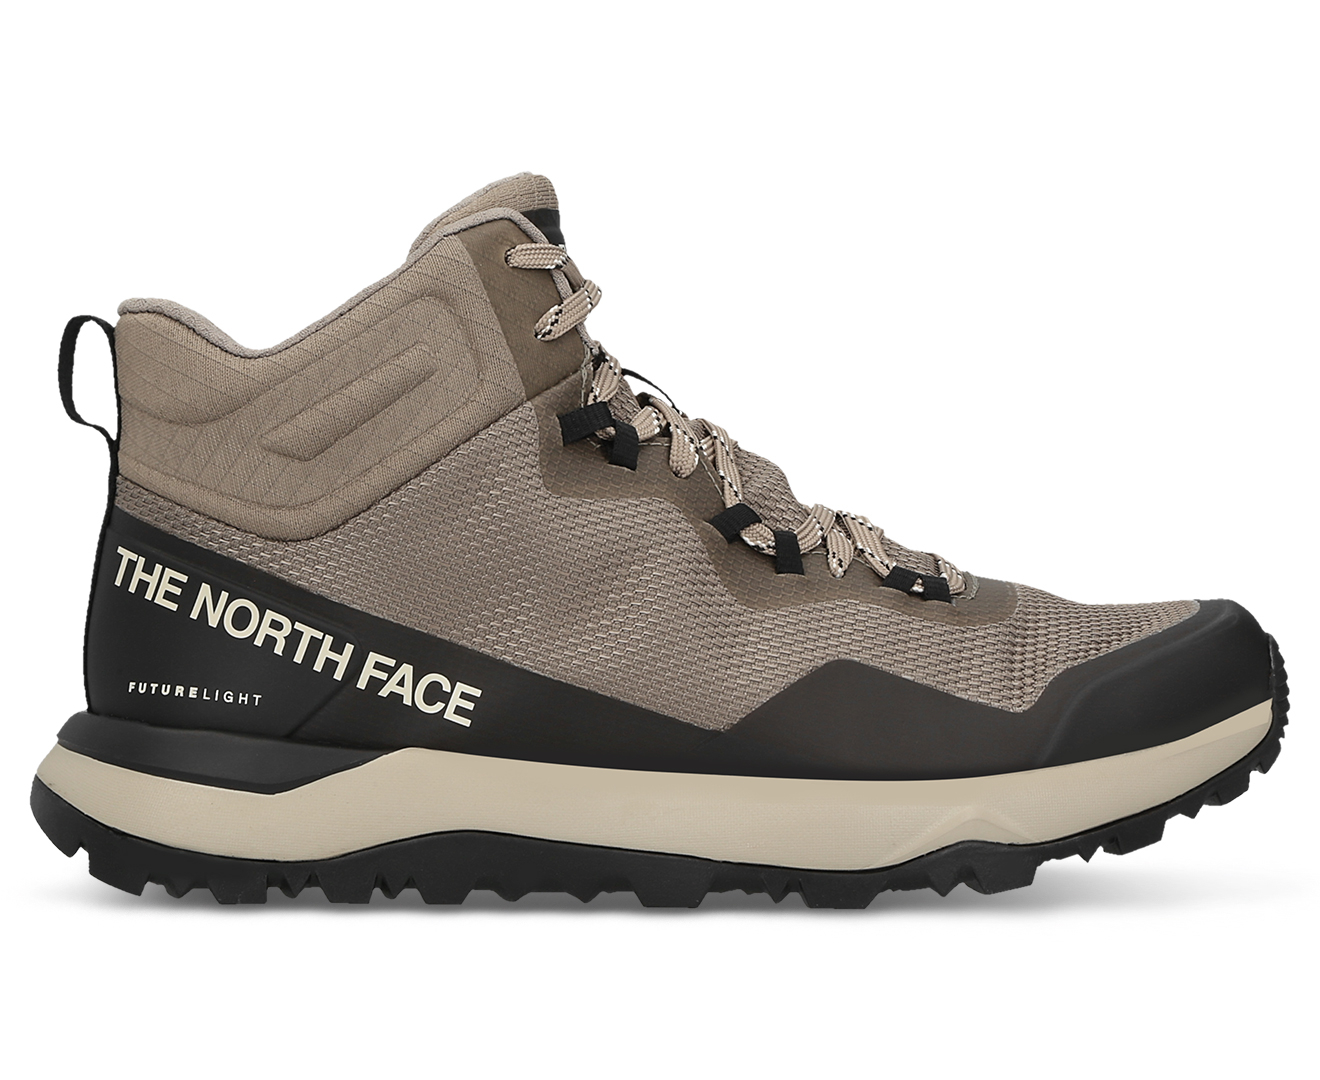 The North Face Men's Activist Mid Futurelight Hiking Boots - Mineral ...